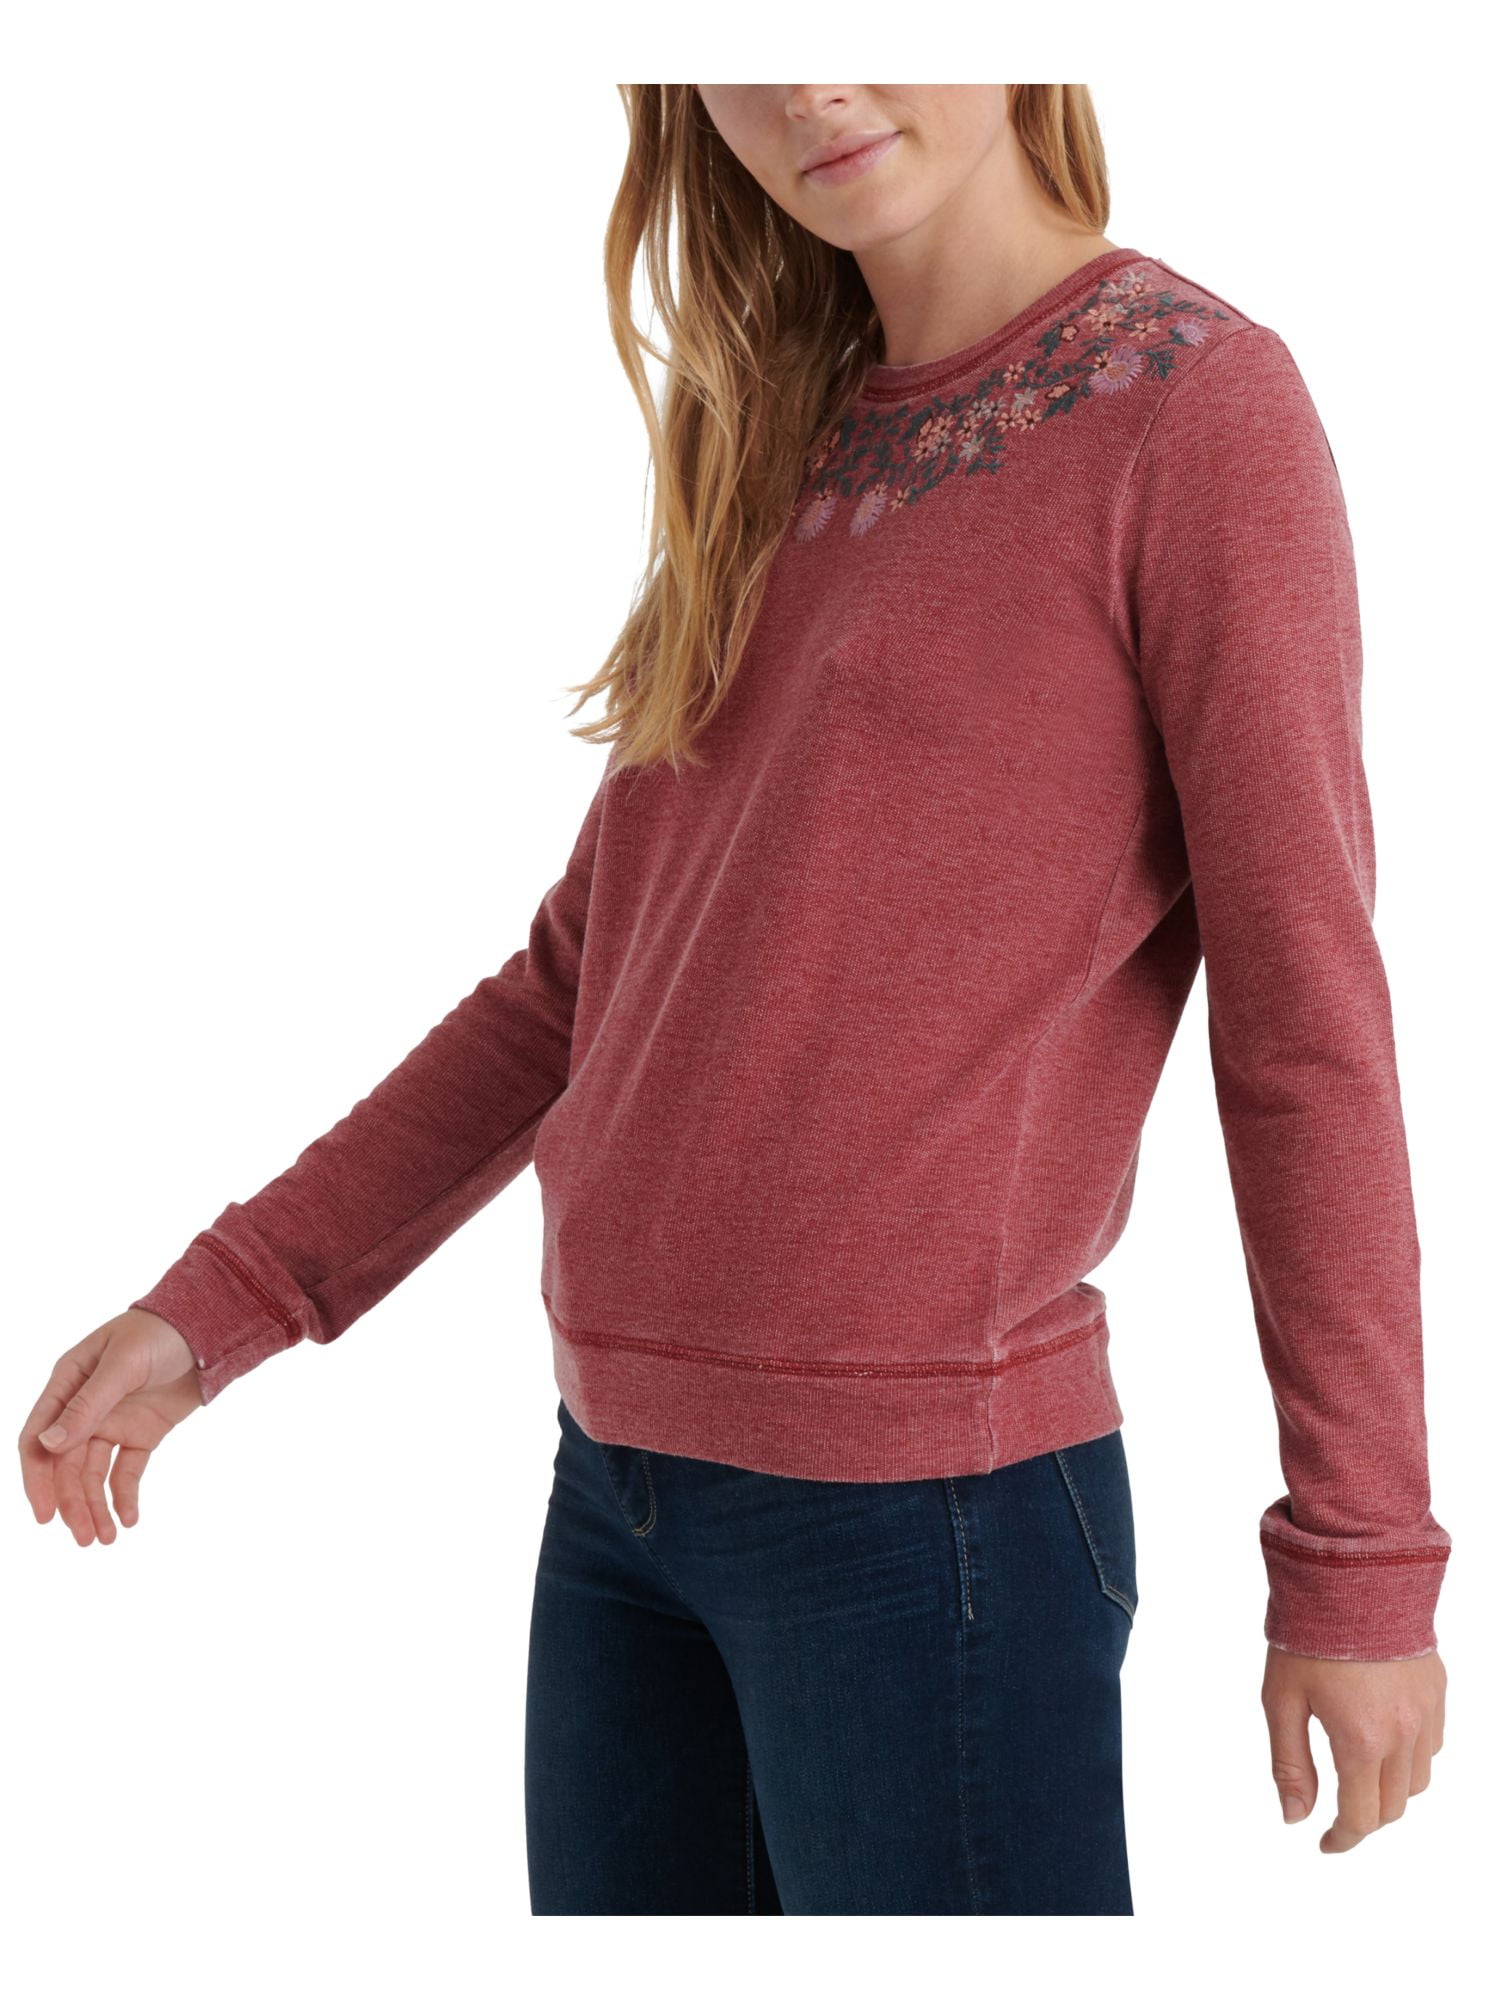 LUCKY BRAND Womens Burgundy Floral Long Sleeve Crew Neck Top Size